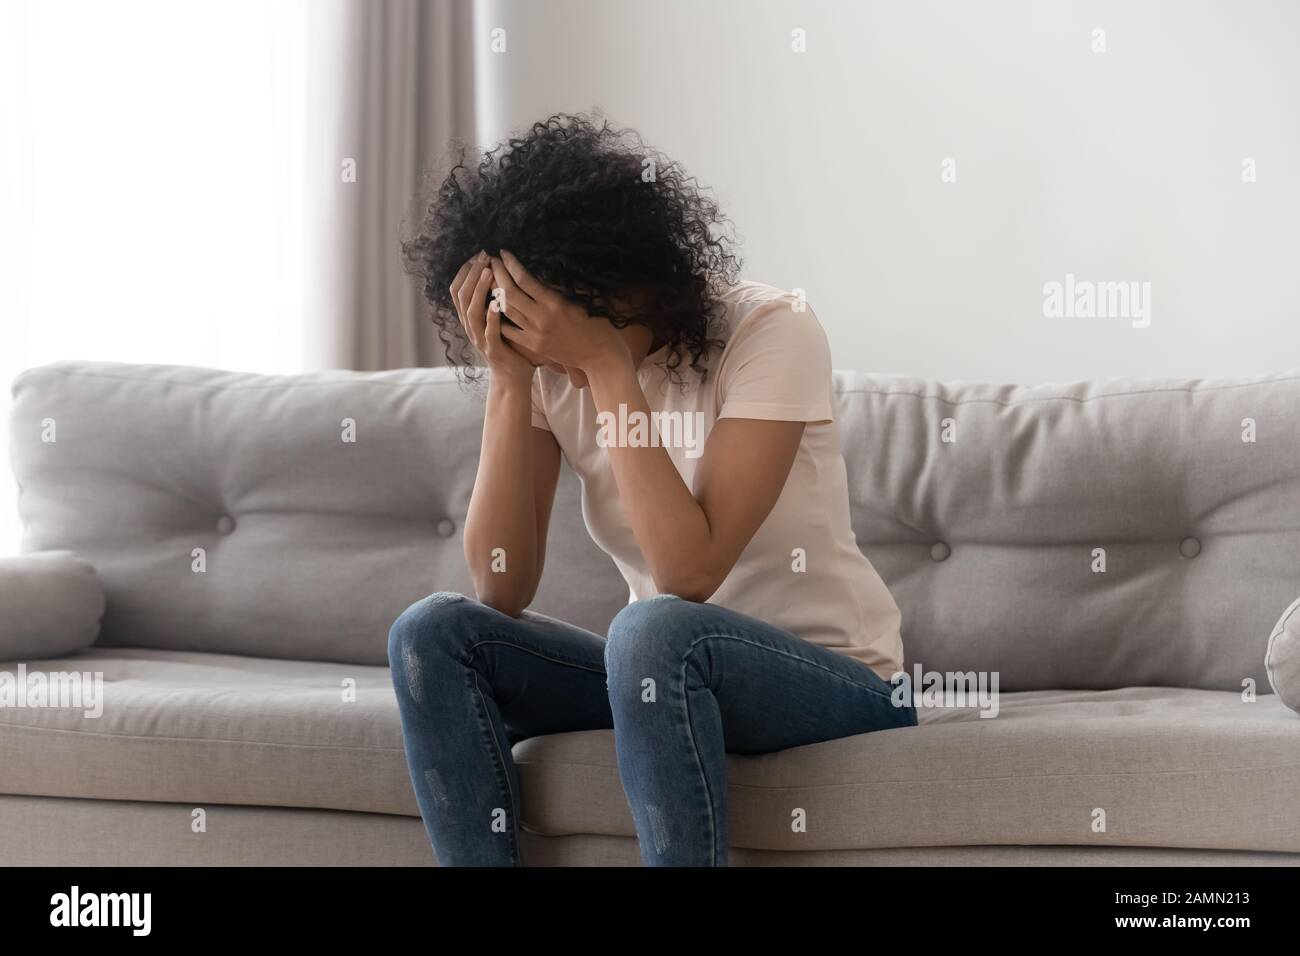 African woman cover face with hands crying sitting on couch Stock Photo